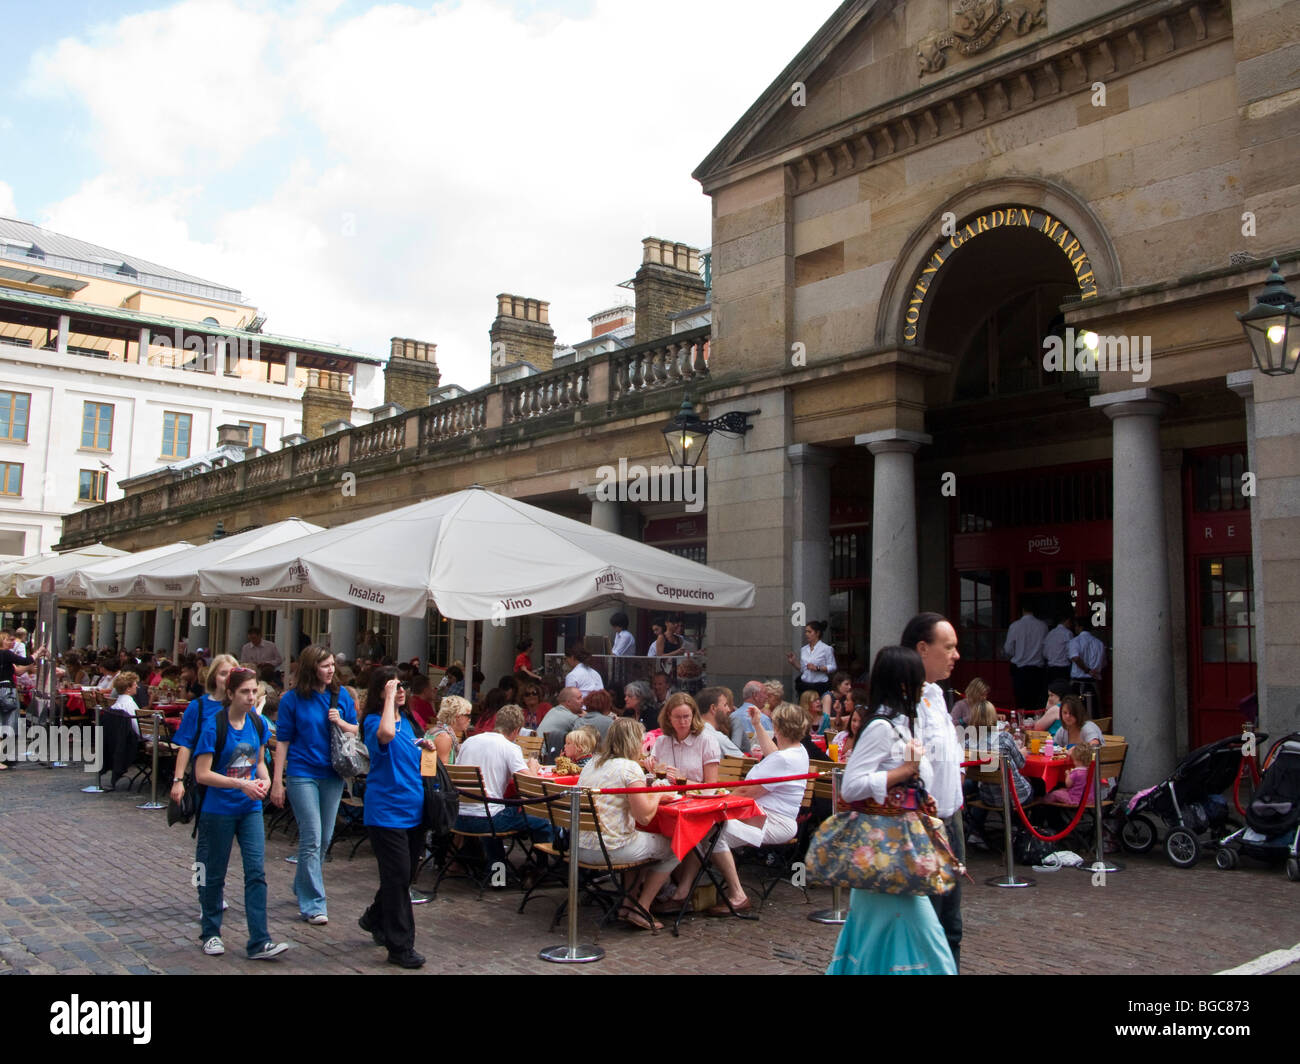 Covent Garden London High Resolution Stock Photography and Images - Alamy